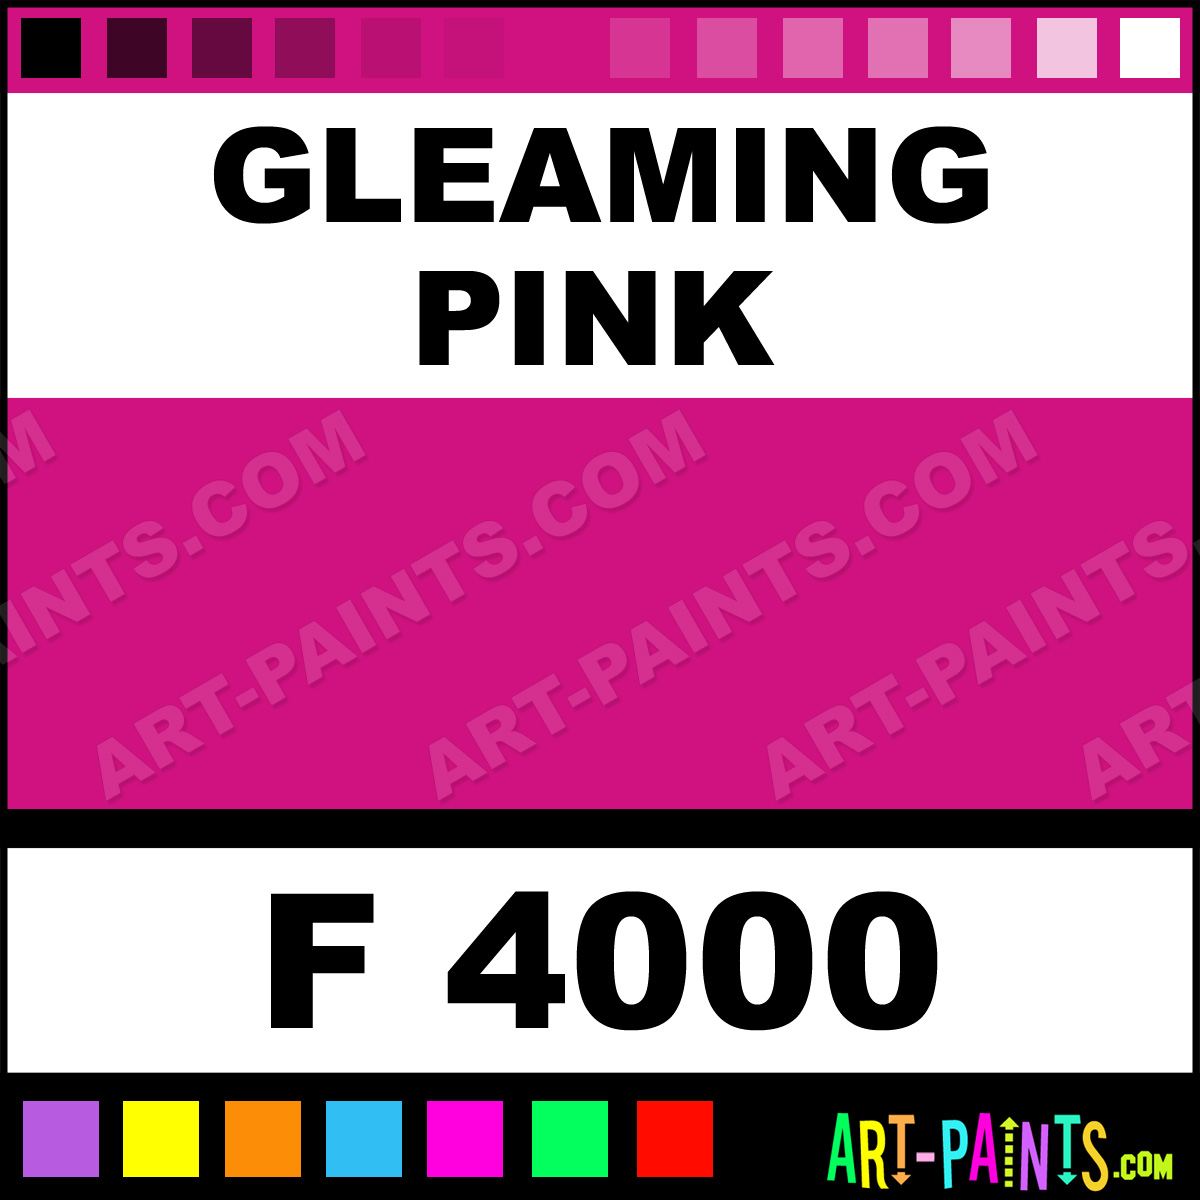 Montana Gold Spray Paint - Pink Gleaming